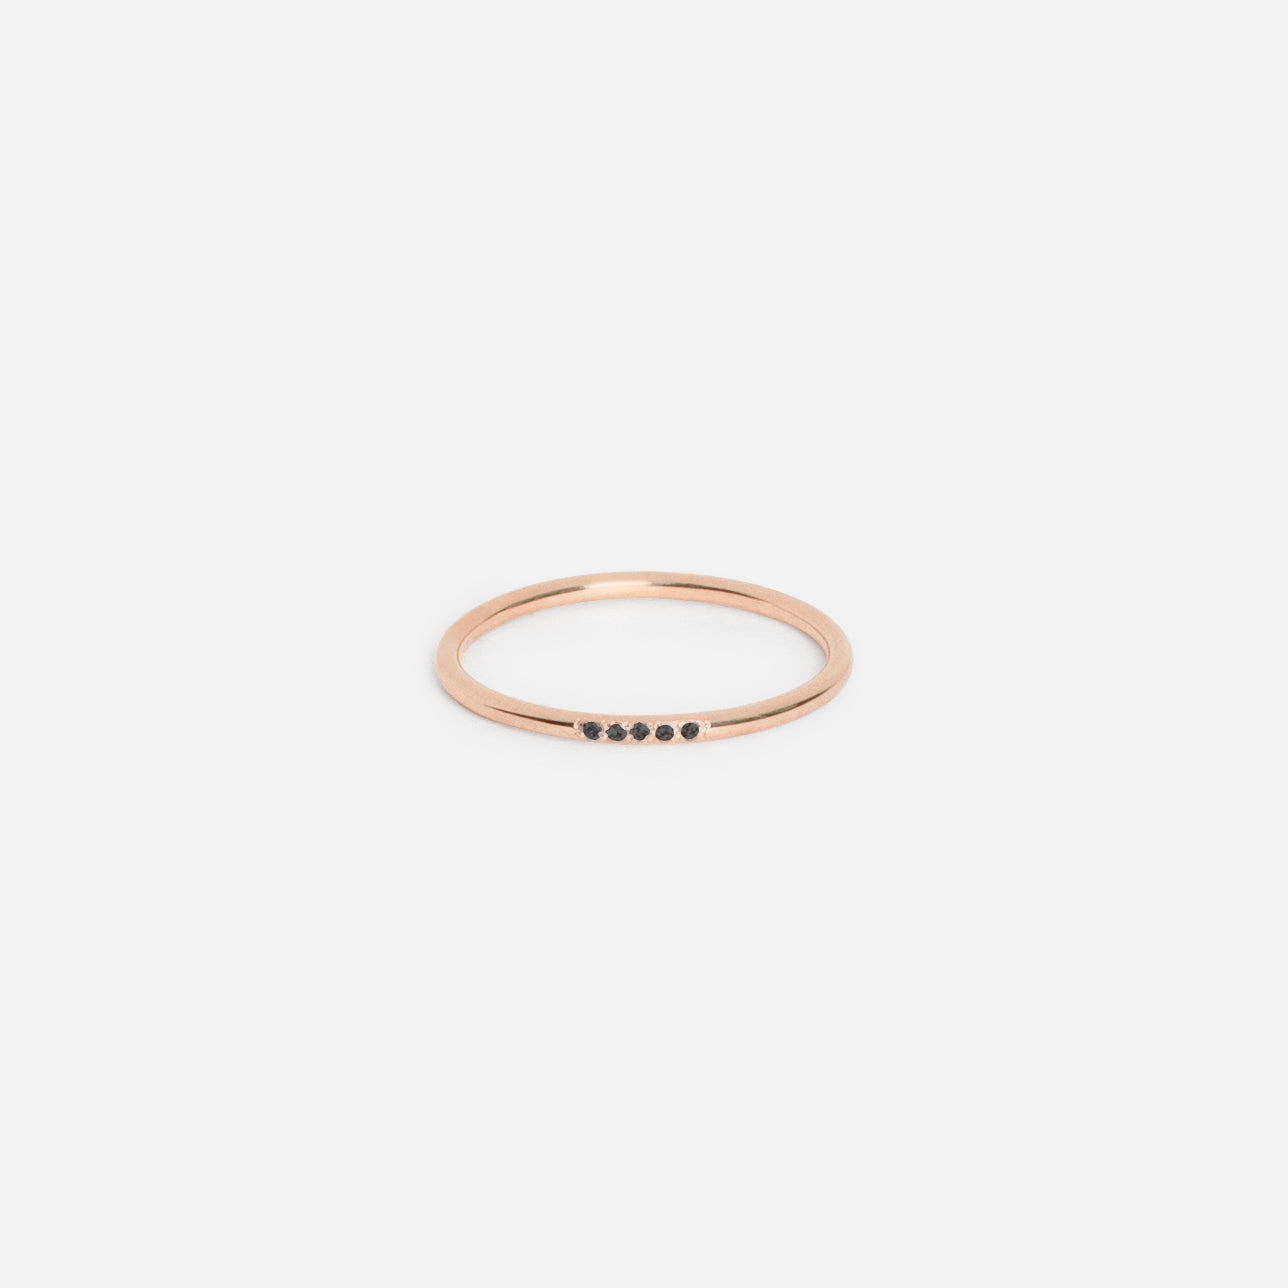 Eiga Delicate Ring in 14k Rose Gold set with Black Diamonds By SHW Fine Jewelry NYC